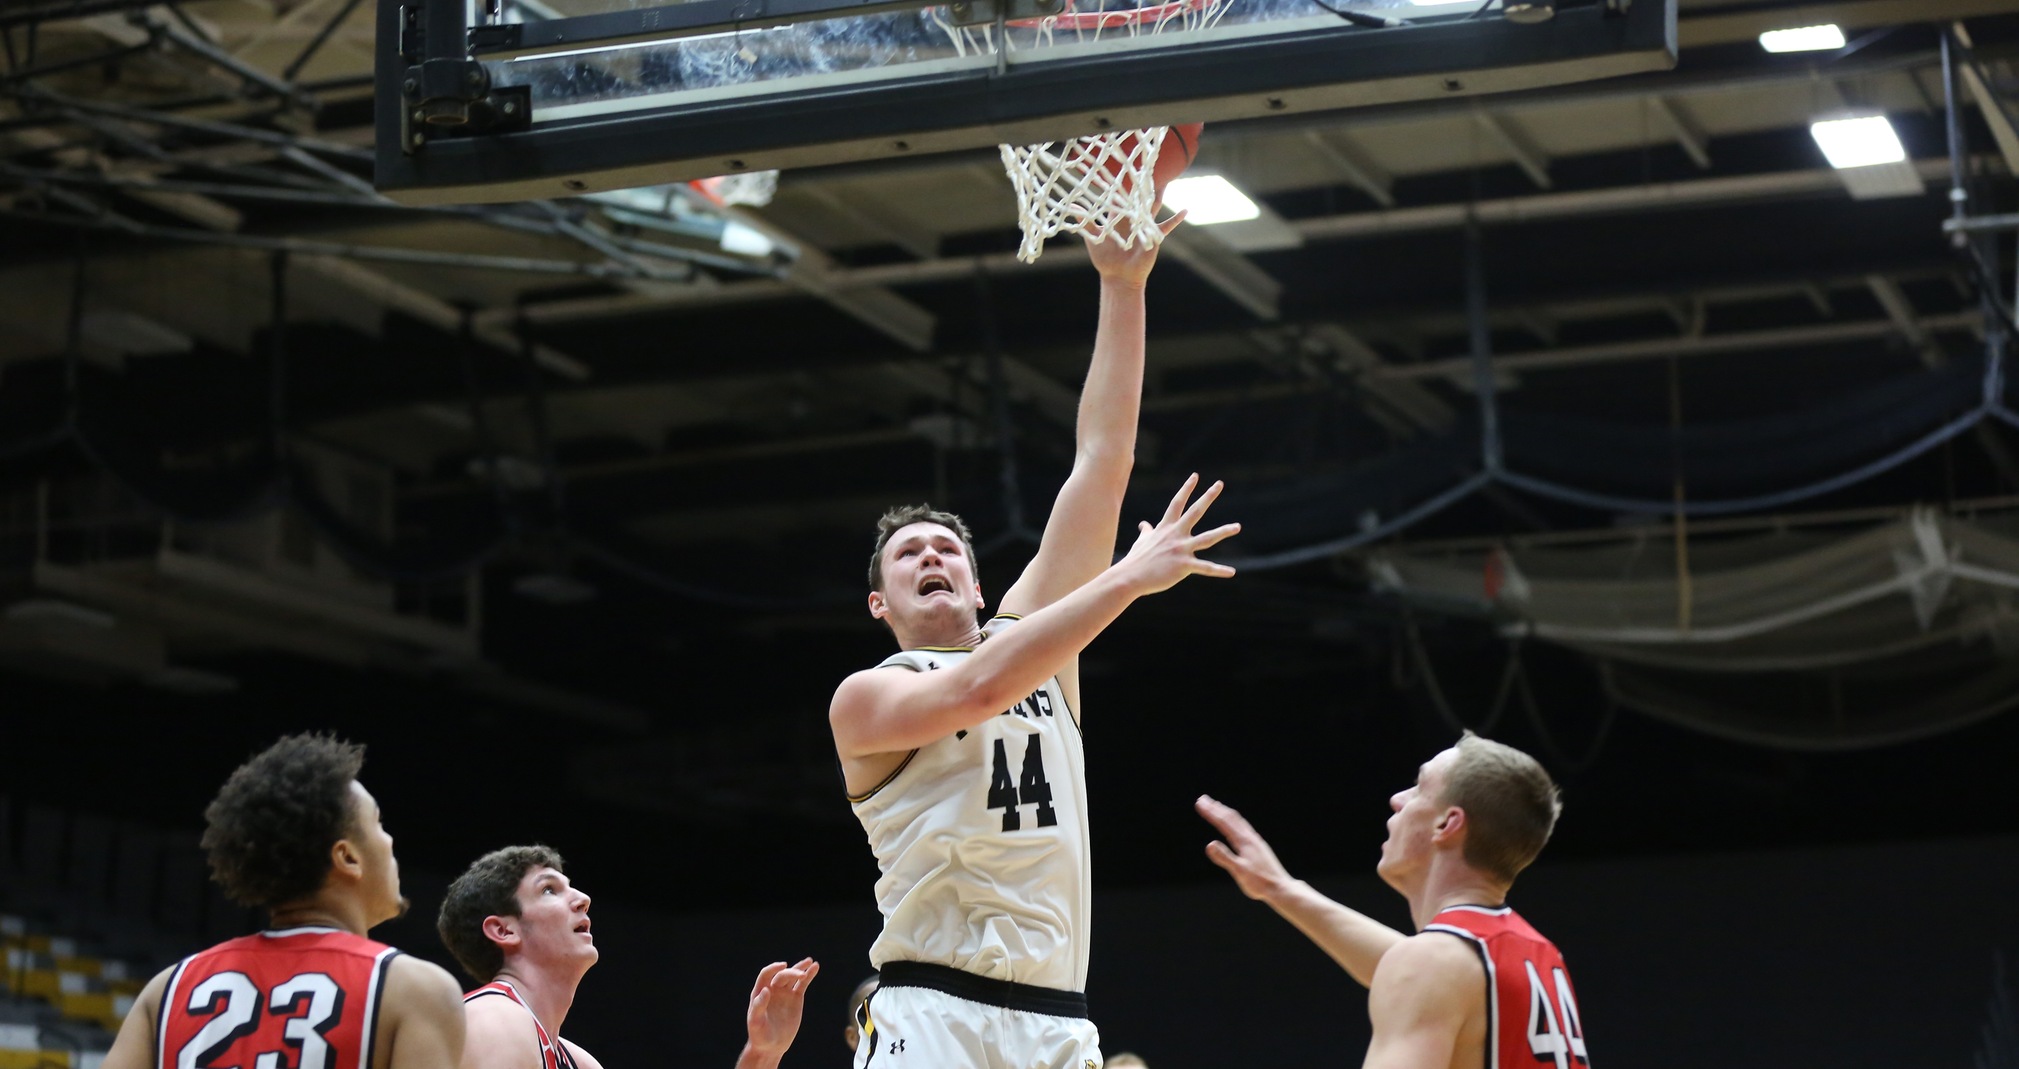 Jack Flynn's 12th career double-double featured 18 points and a personal-best 15 rebounds.